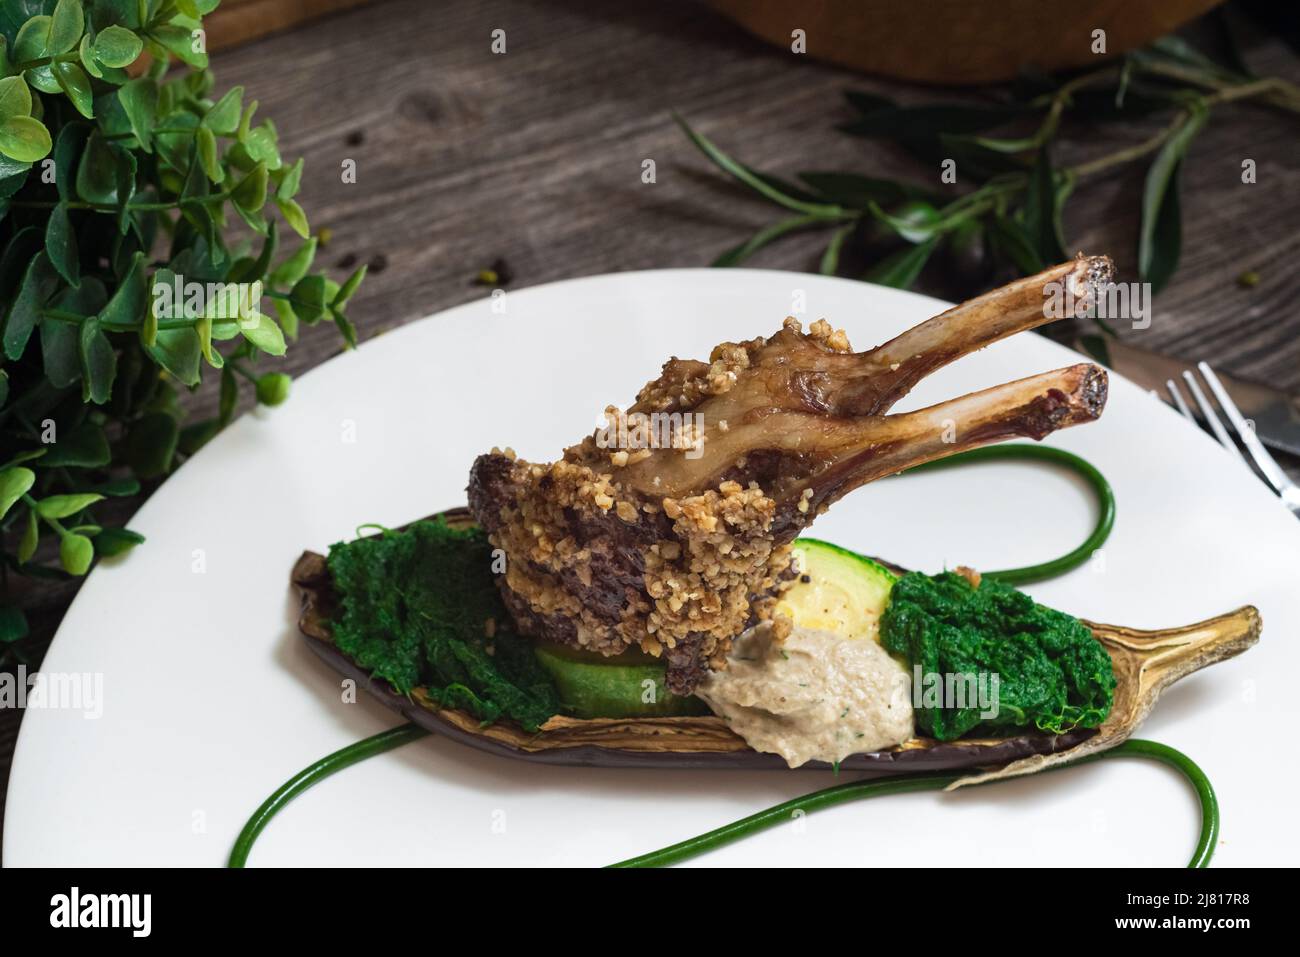 Rack of lamb in nut batter with baked vegetables. Spinach paste and baked eggplant. Molecular food. Stock Photo